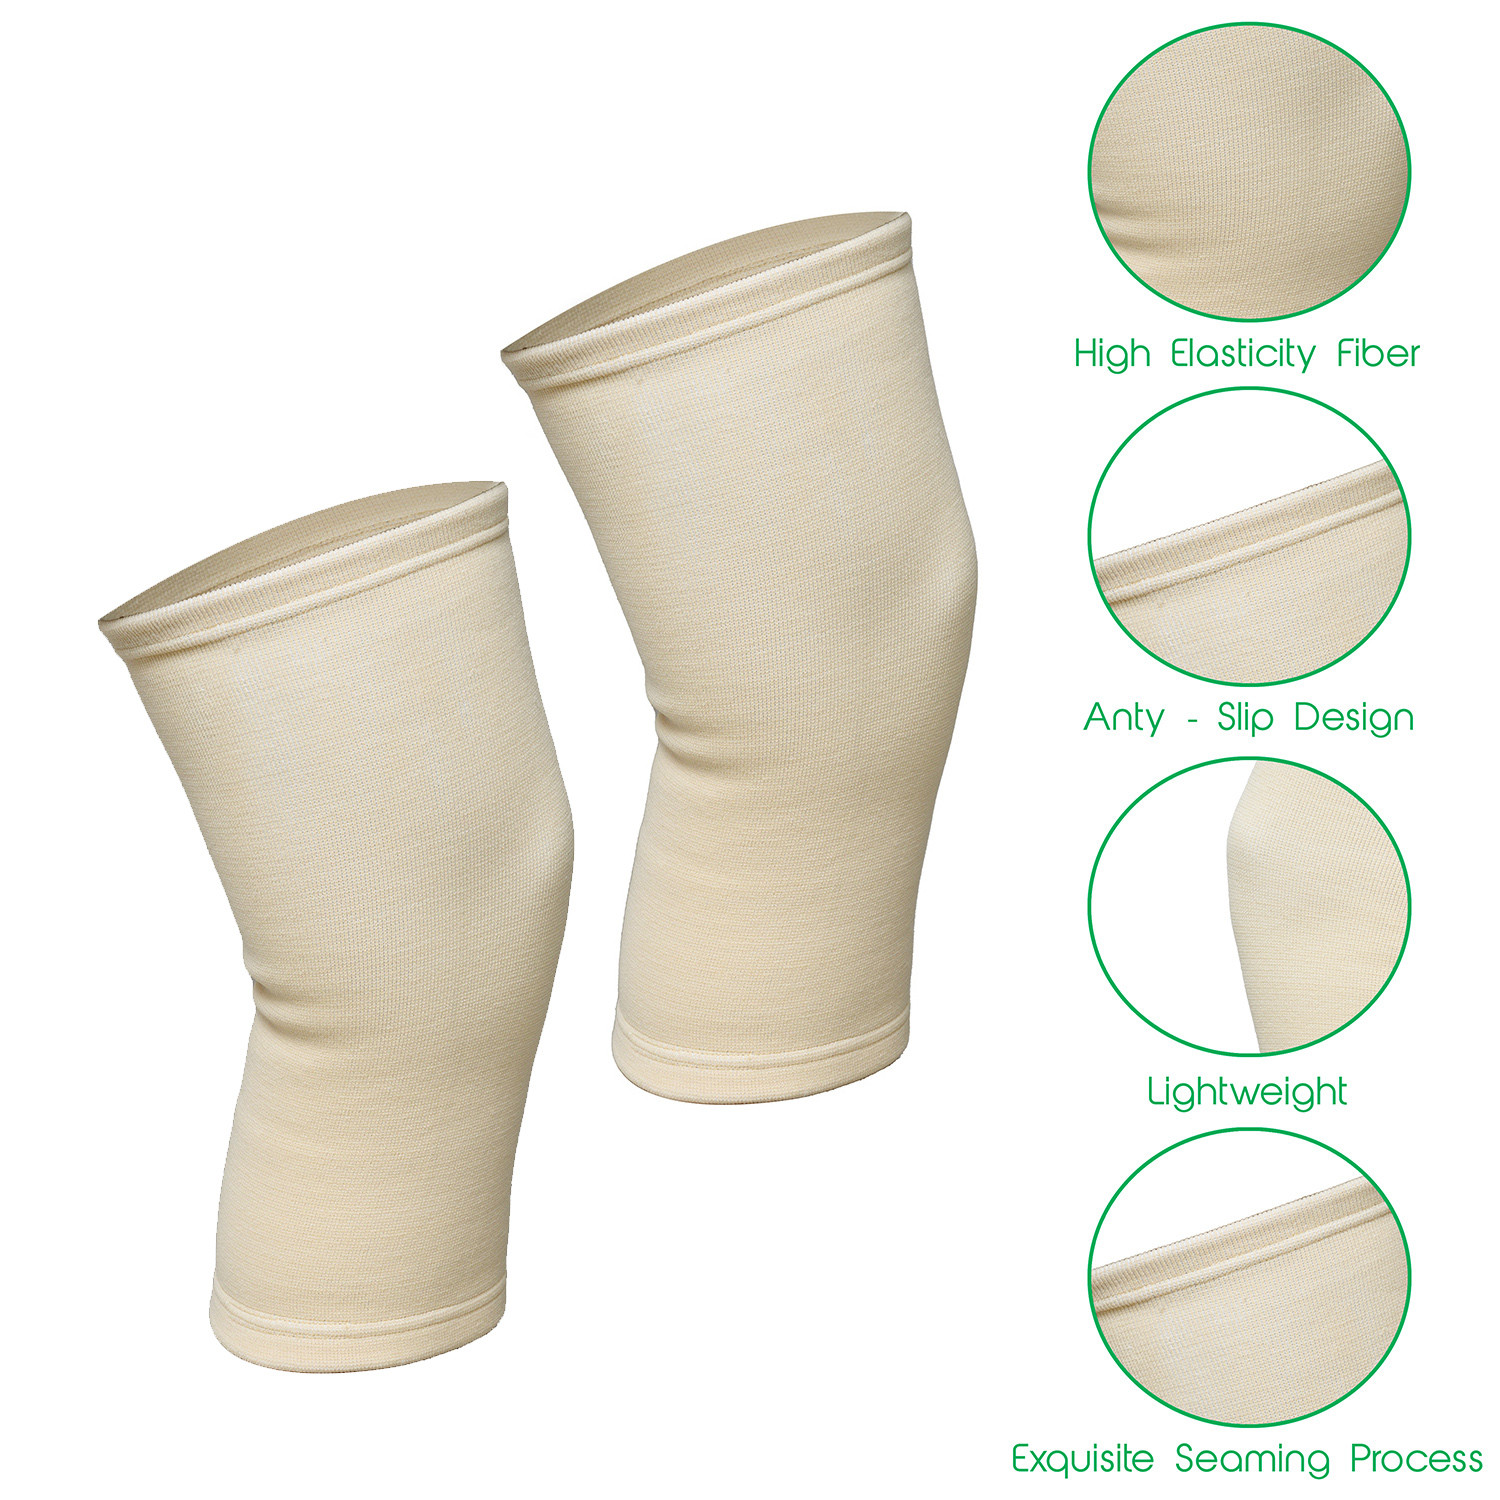 Kuber Industries Knee Cap | Cotton 4 Way Compression Knee Sleeves |Sleeves For Joint Pain | Sleeves For Arthritis Relief | Unisex Knee Wraps | Knee Bands |Size-XL|1 Pair|Cream